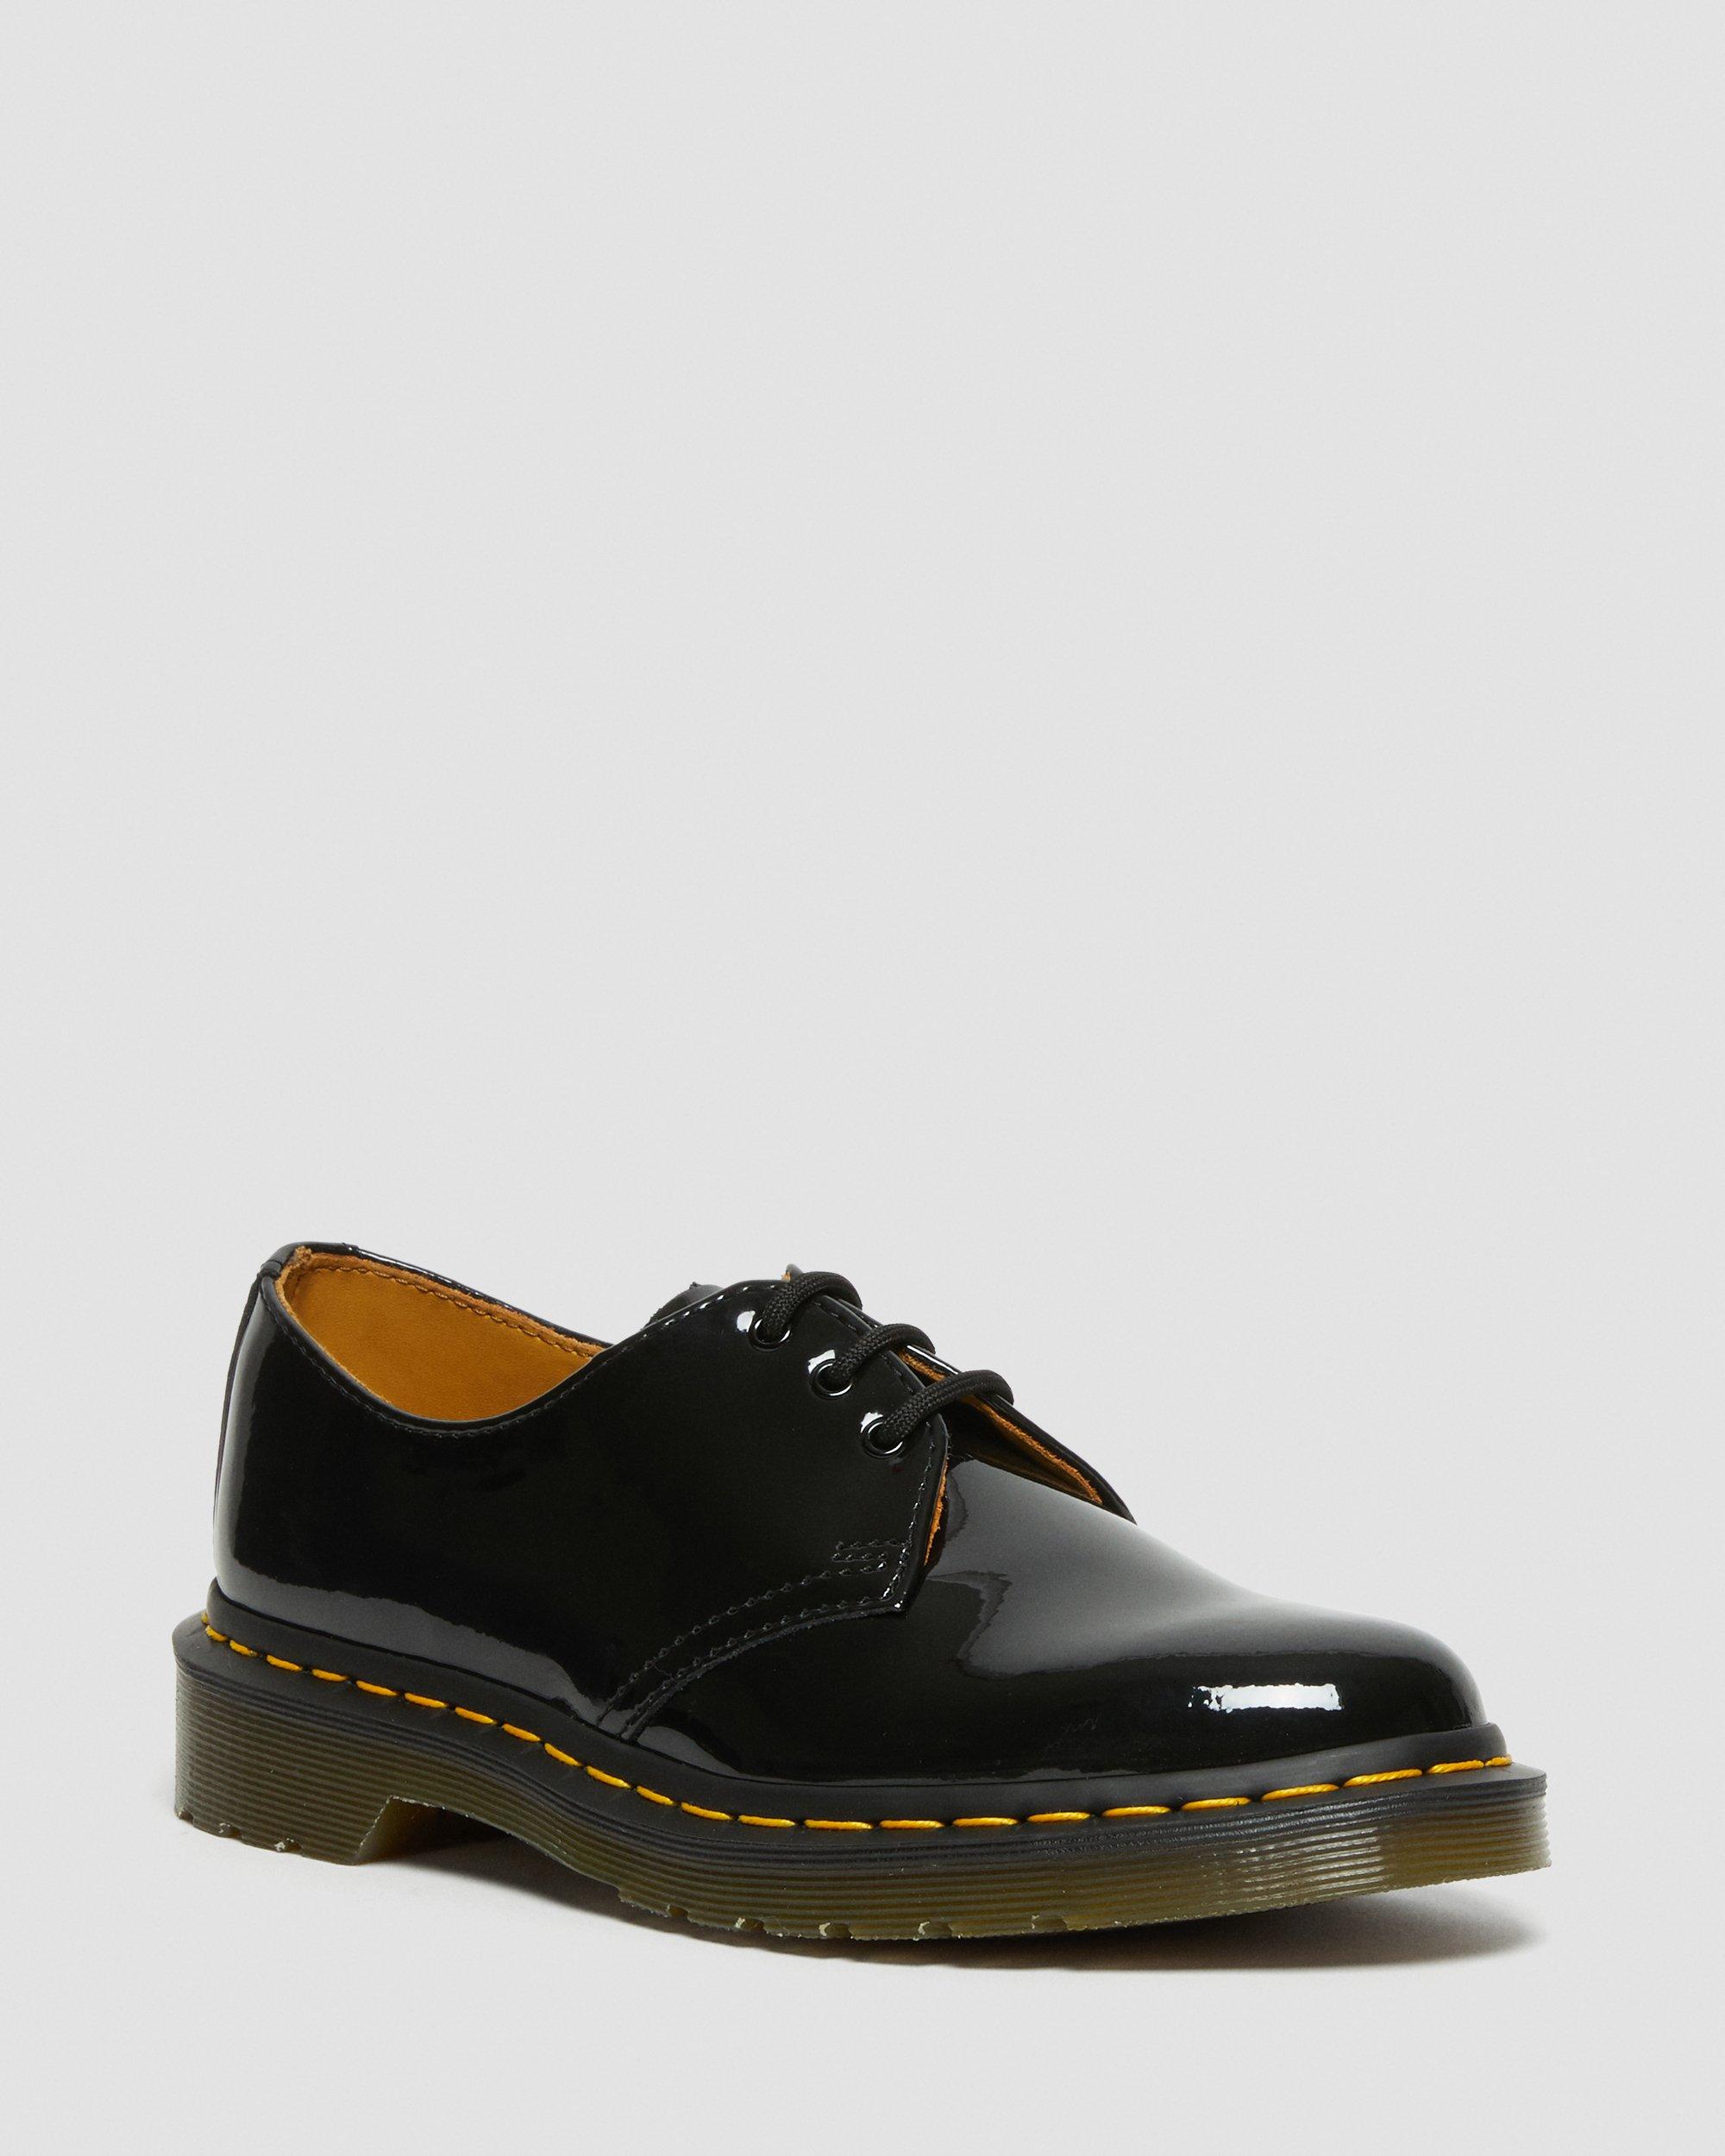 1461 Patent Leather Oxford Shoes1461 Patent Leather Oxford Shoes Dr. Martens